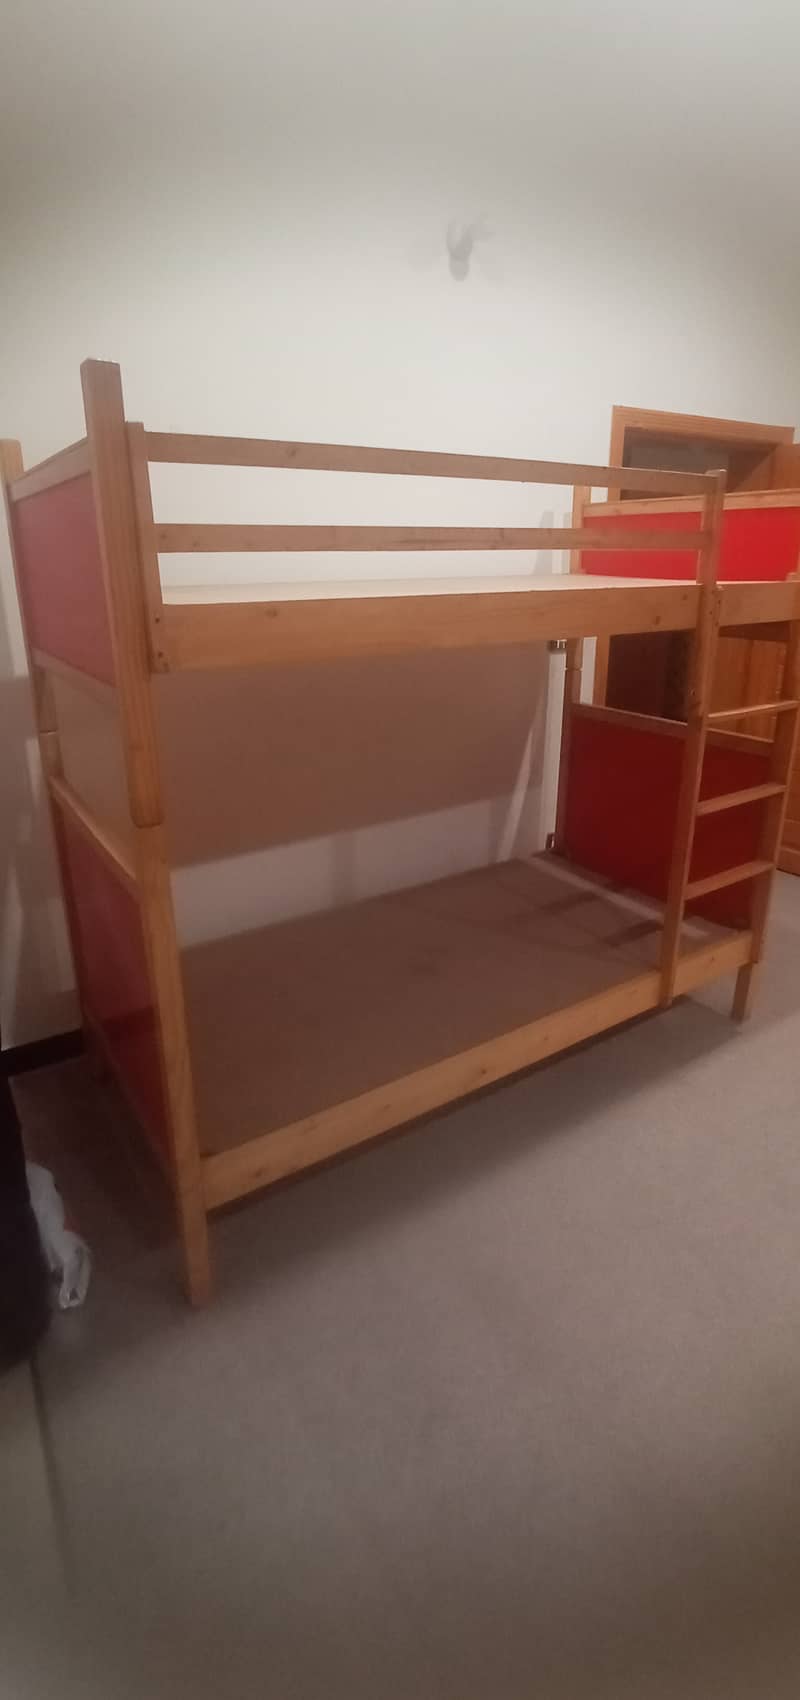 Bunker bed with mattress for sale 2